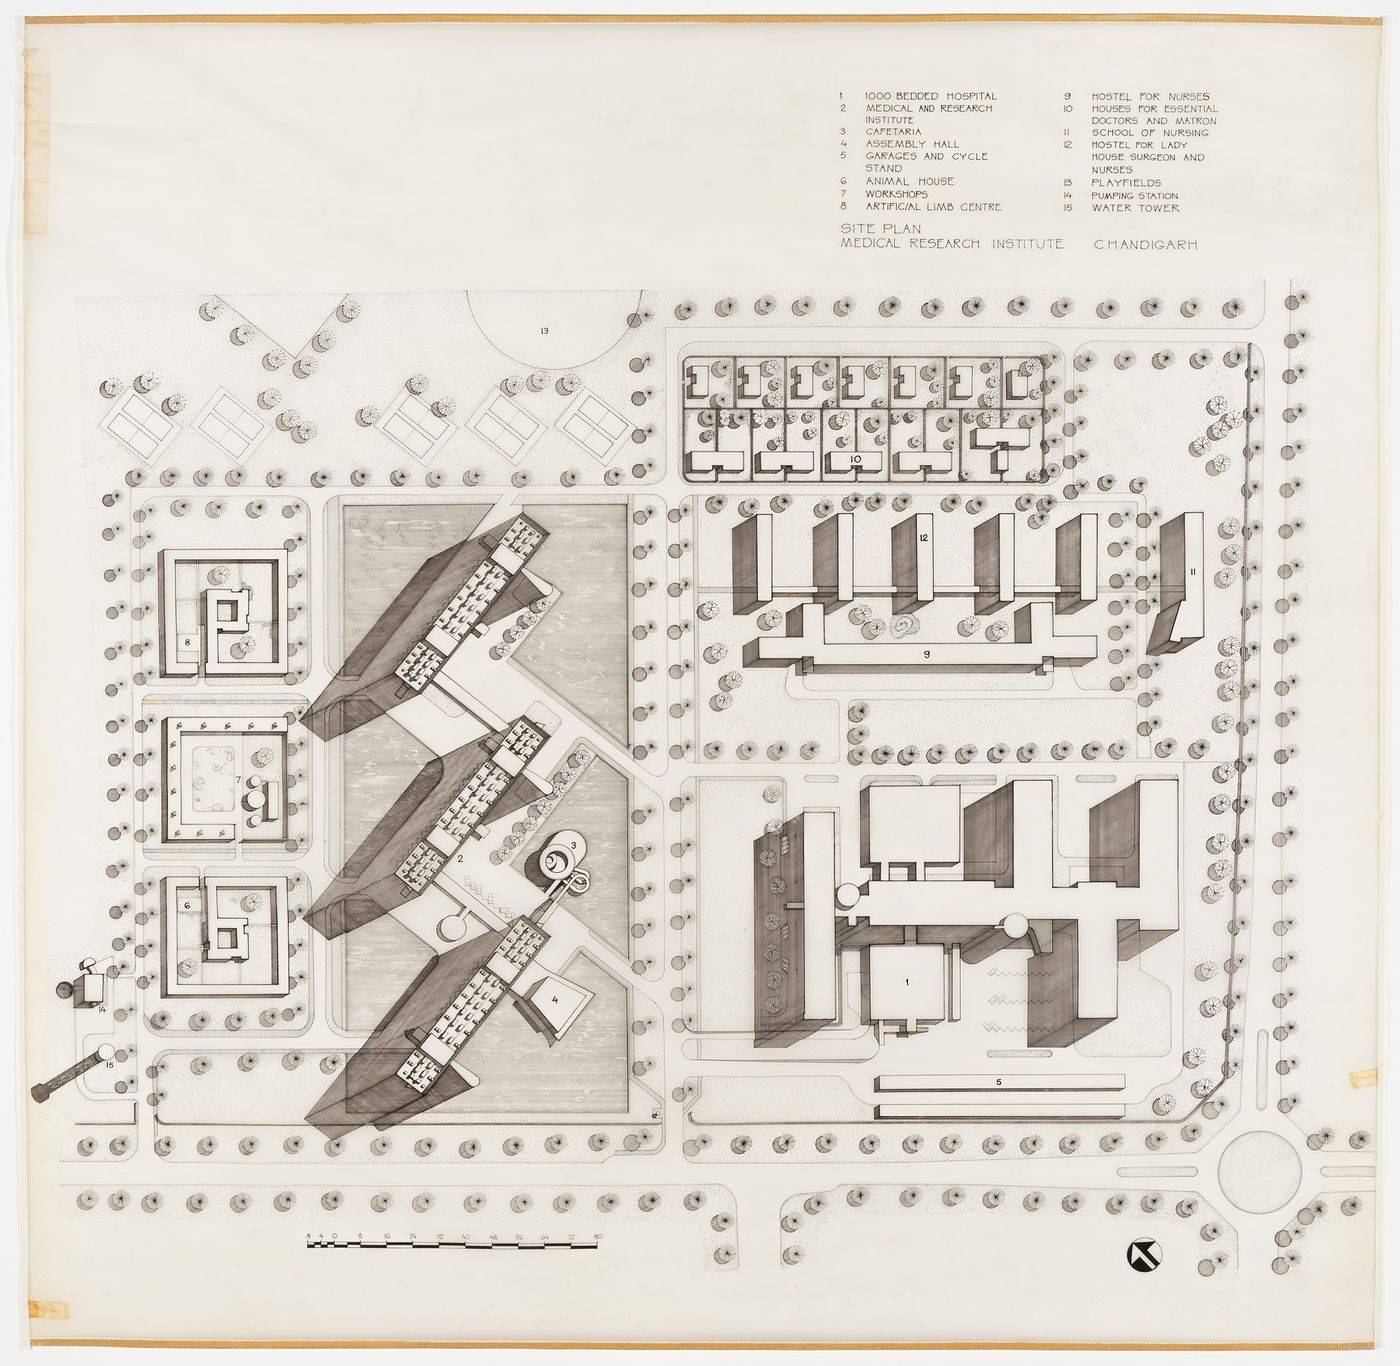 Site plan for Medical Research Institute (the PGIMER), Chandigarh, India